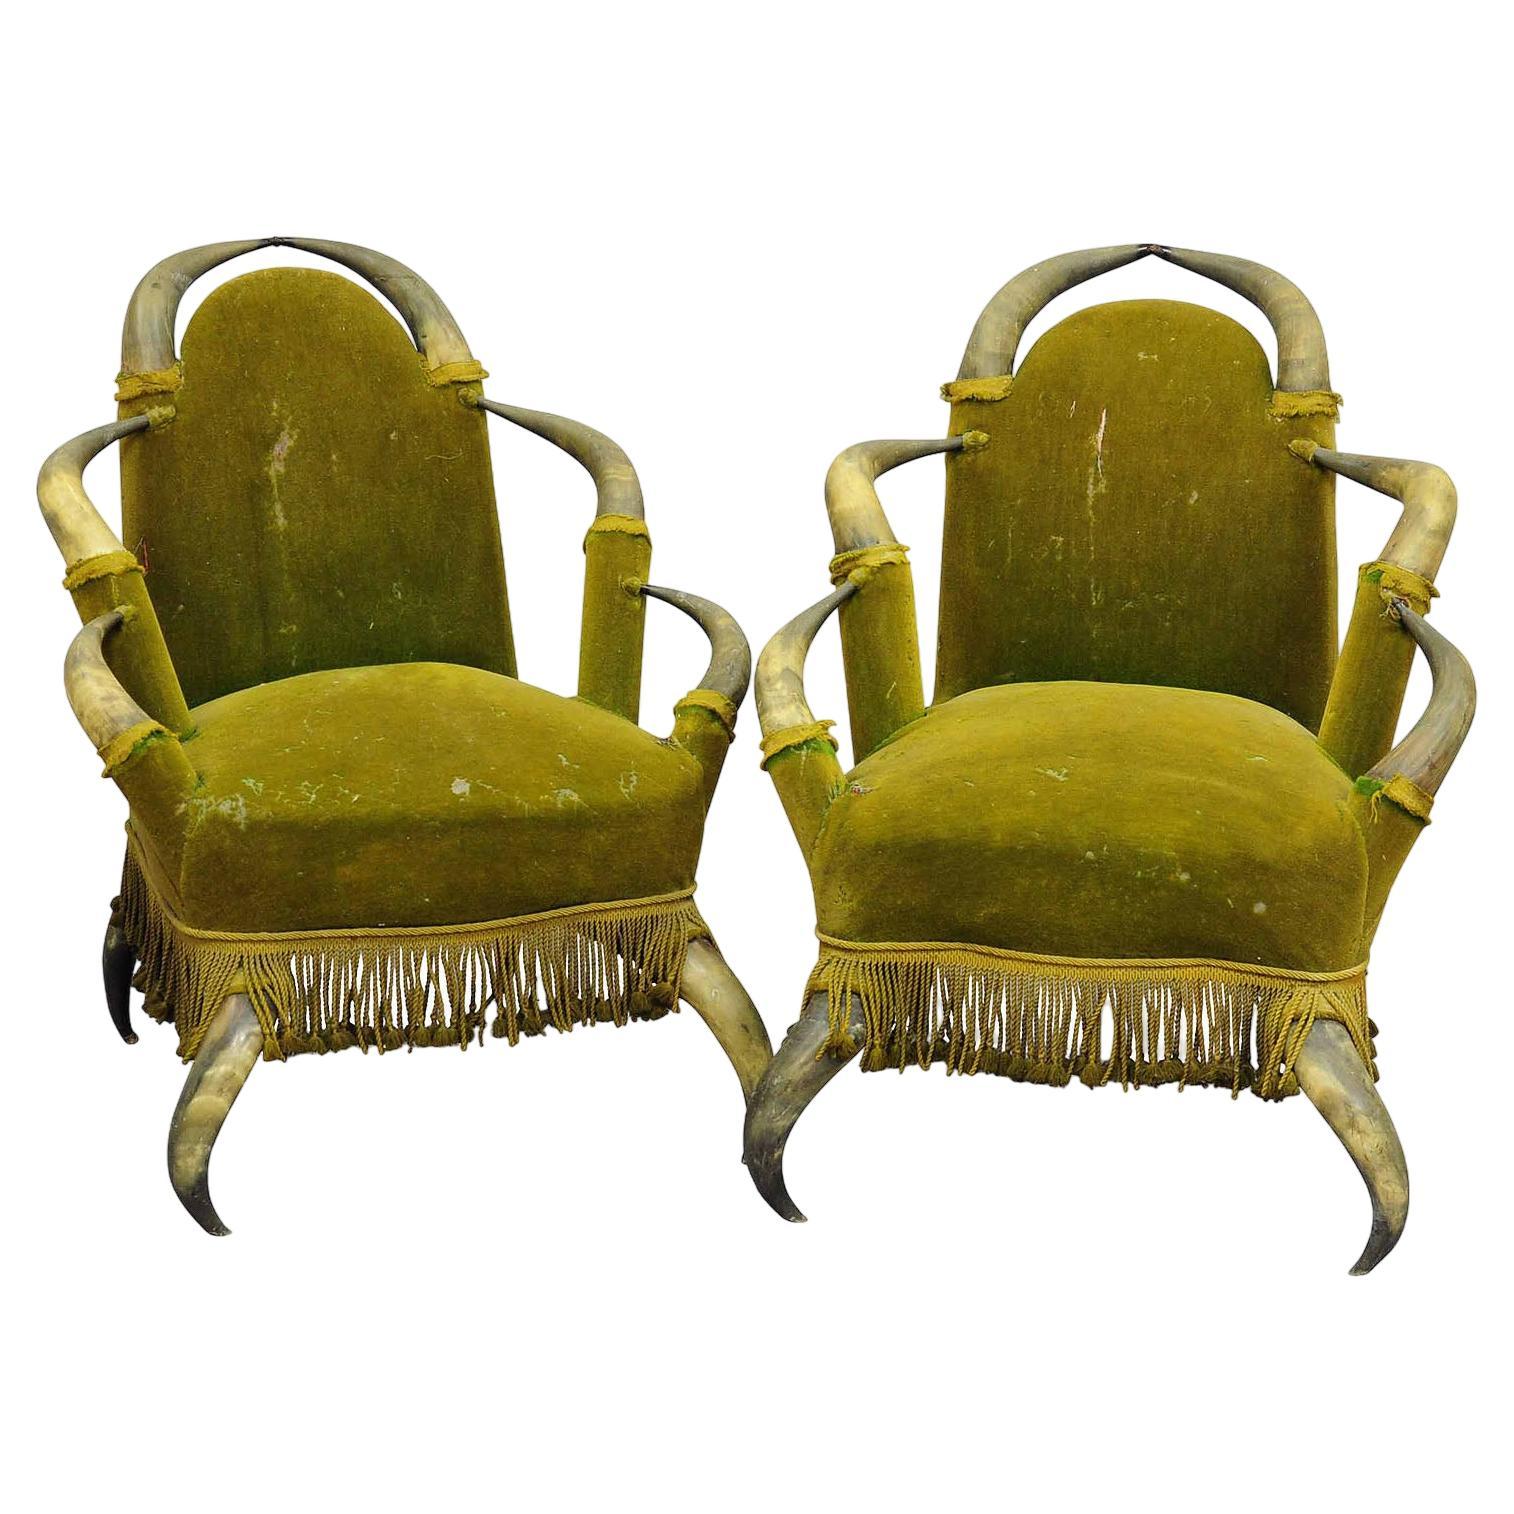 Pair of Antique Bull Horn Chairs Austria 1870 For Sale